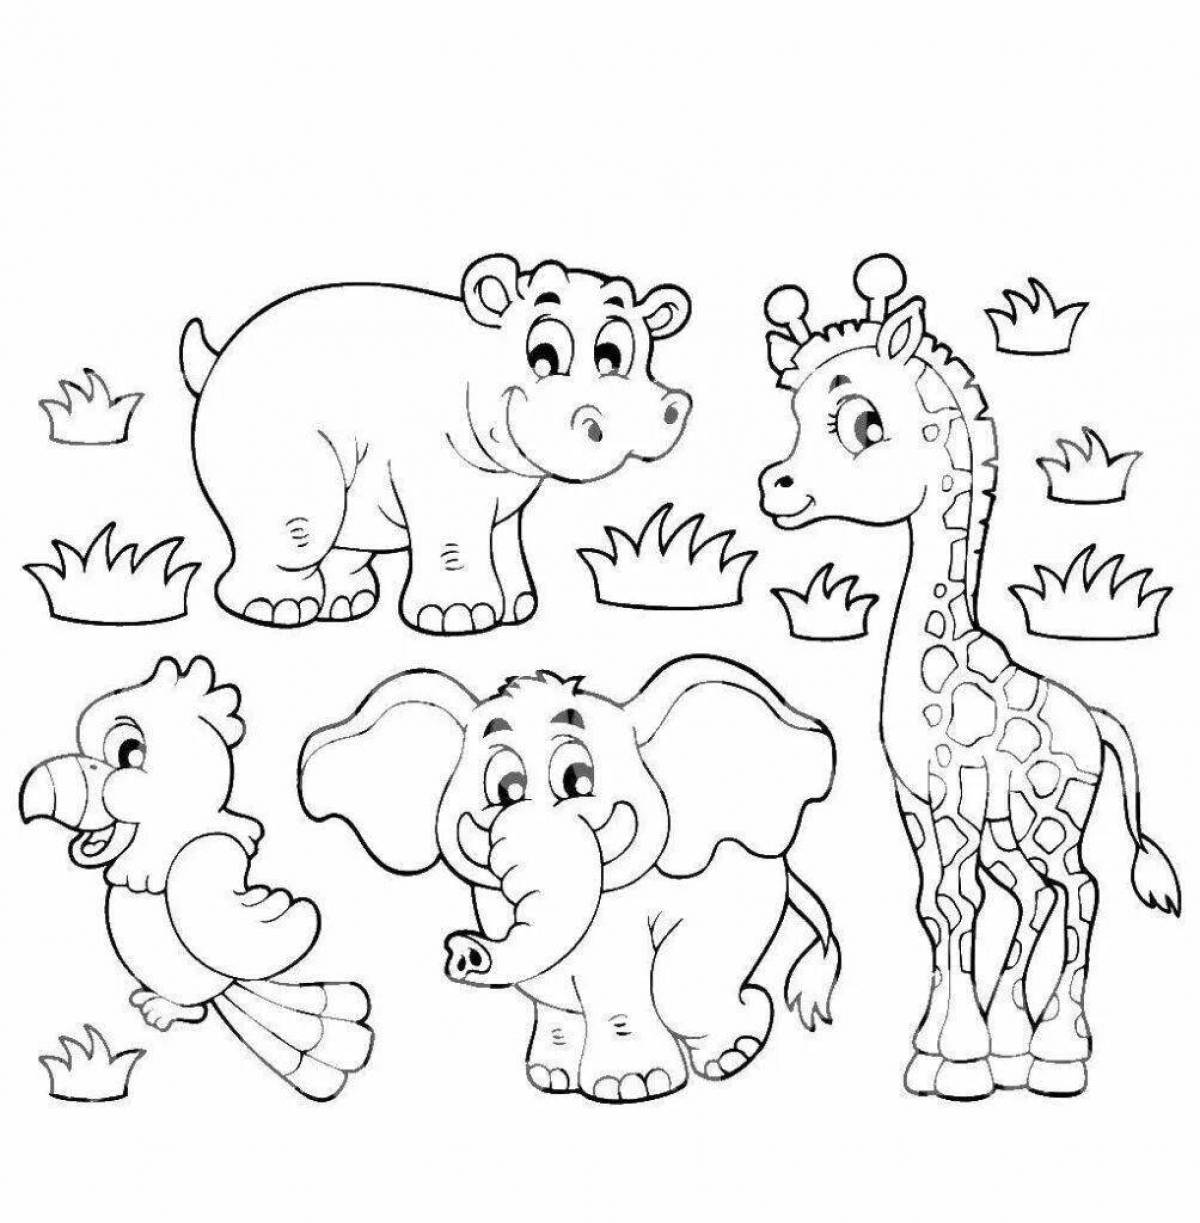 Coloring pages animals of hot countries for children 5 years old